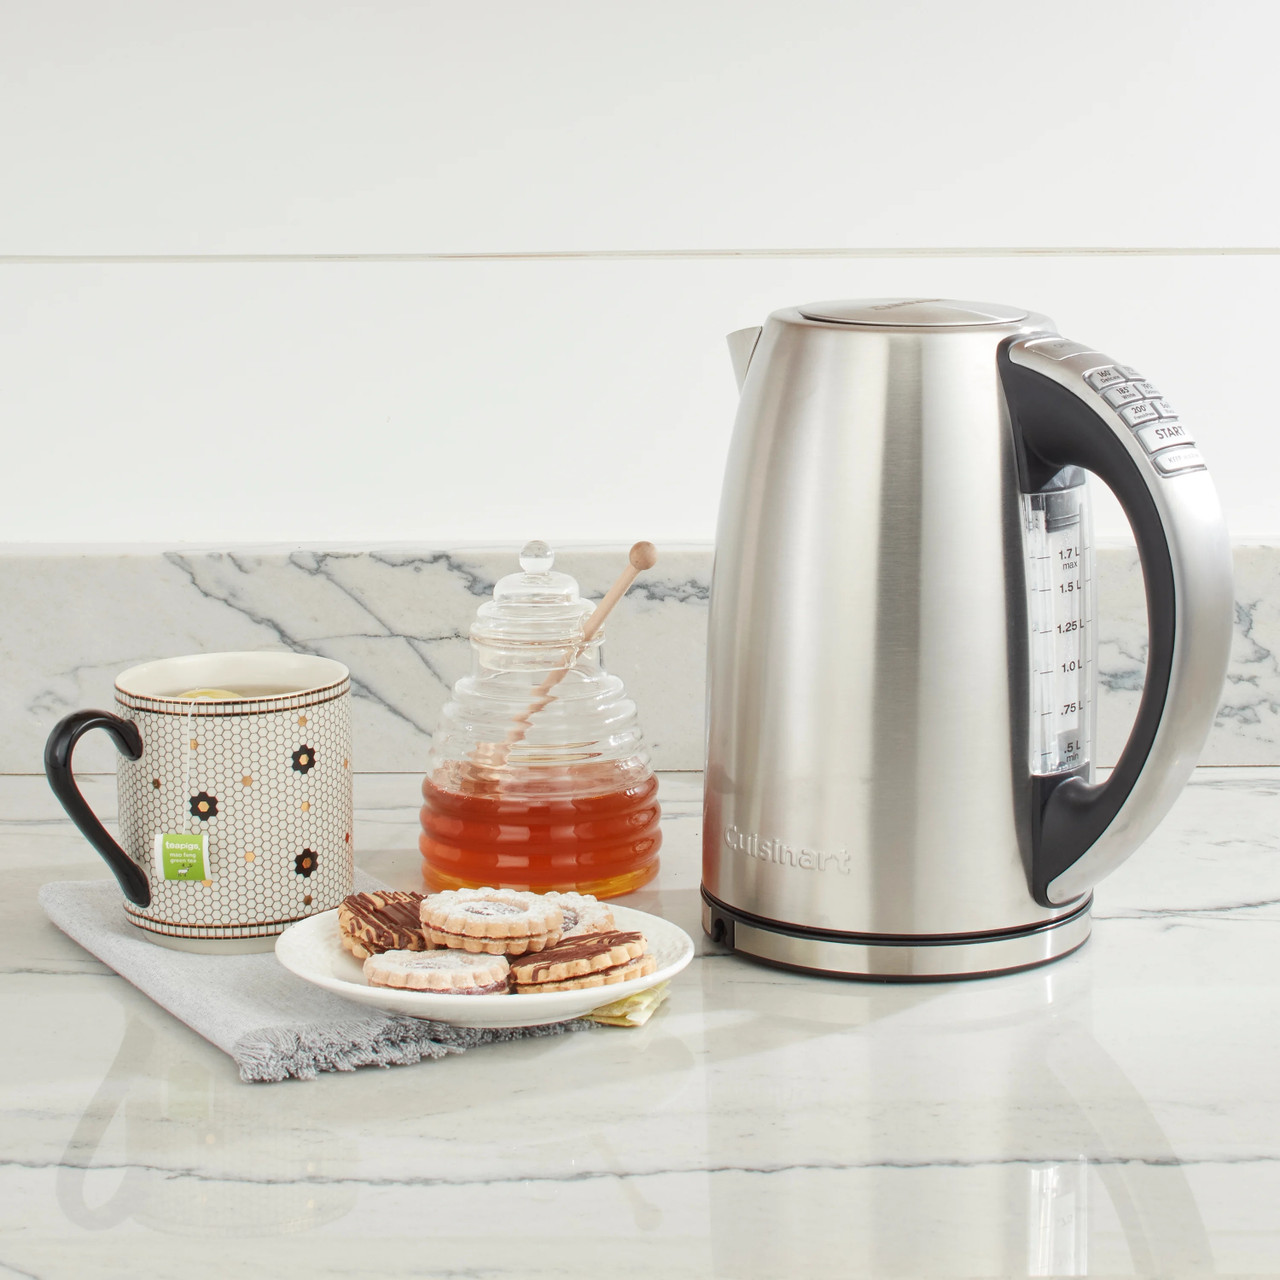 How Does A Cordless Electric Kettle Work